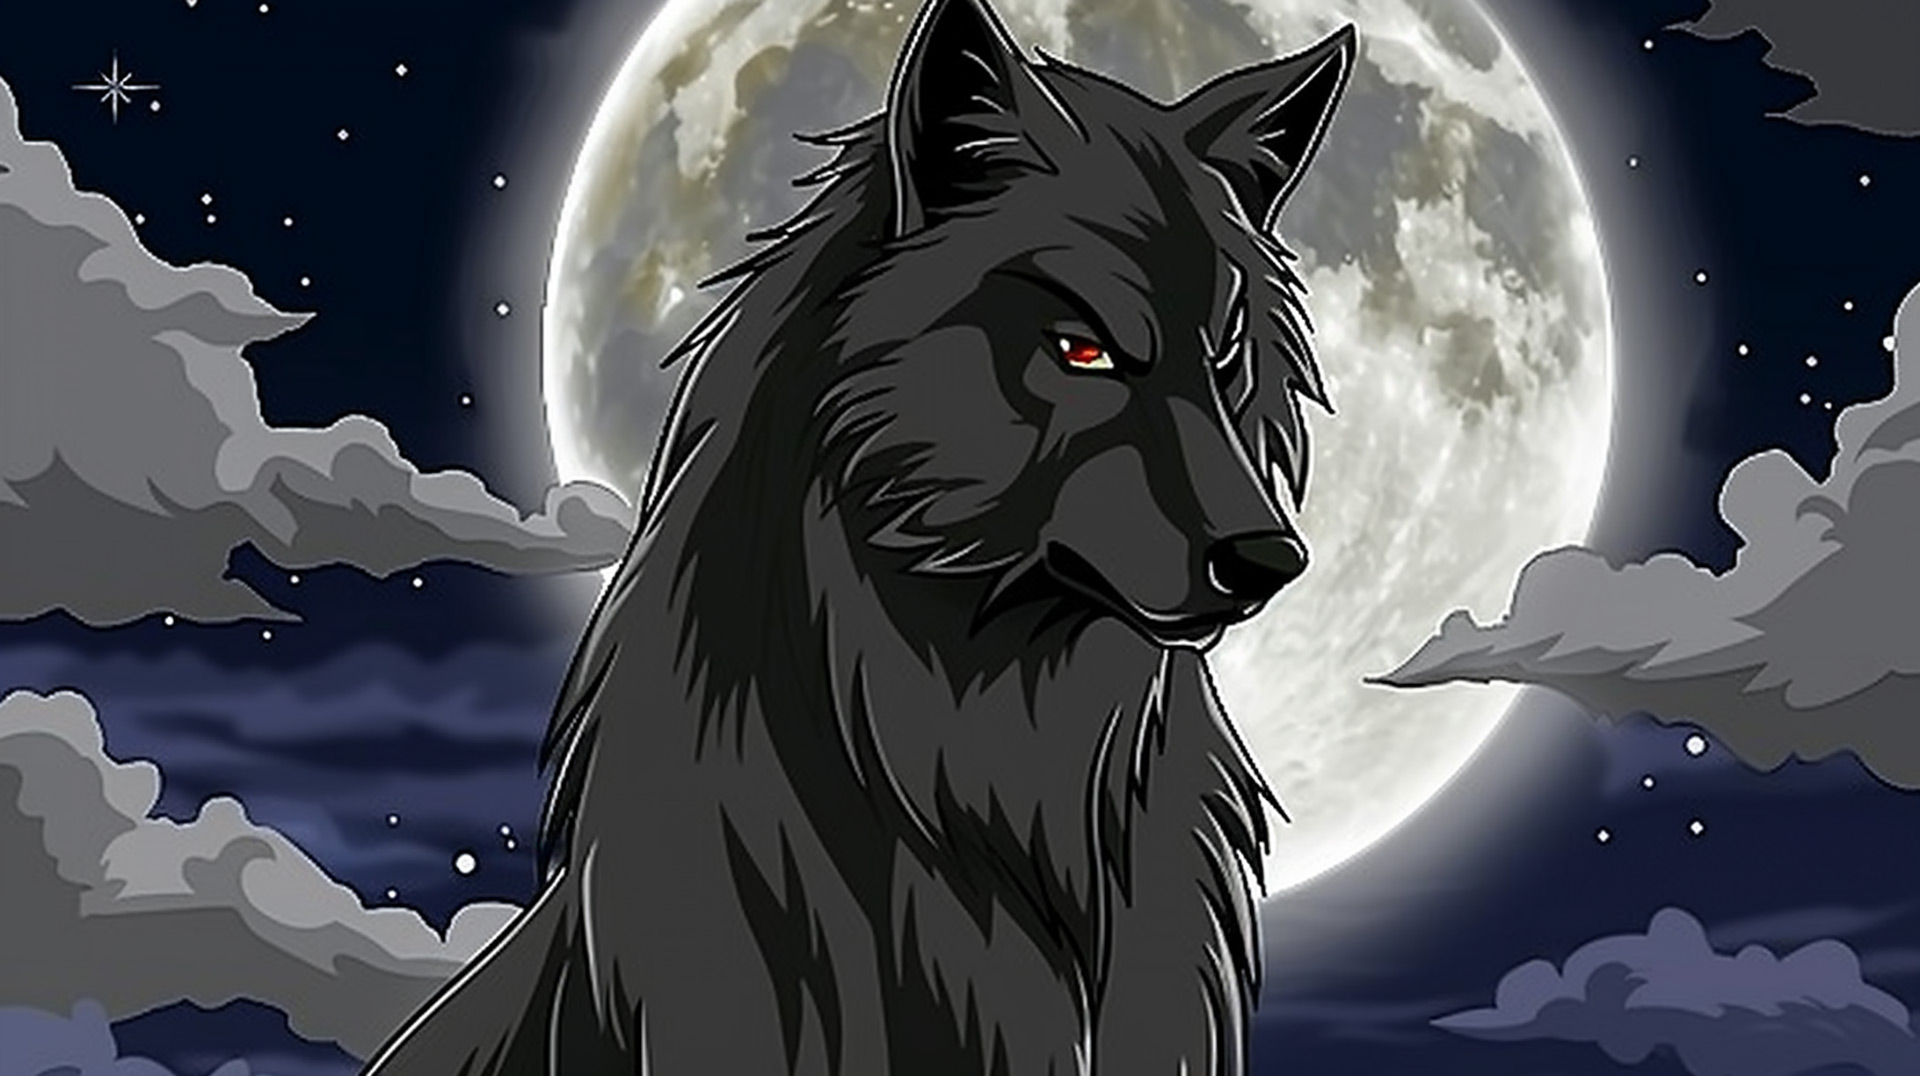 Endearing Wolf and Moon Illustration Wallpaper